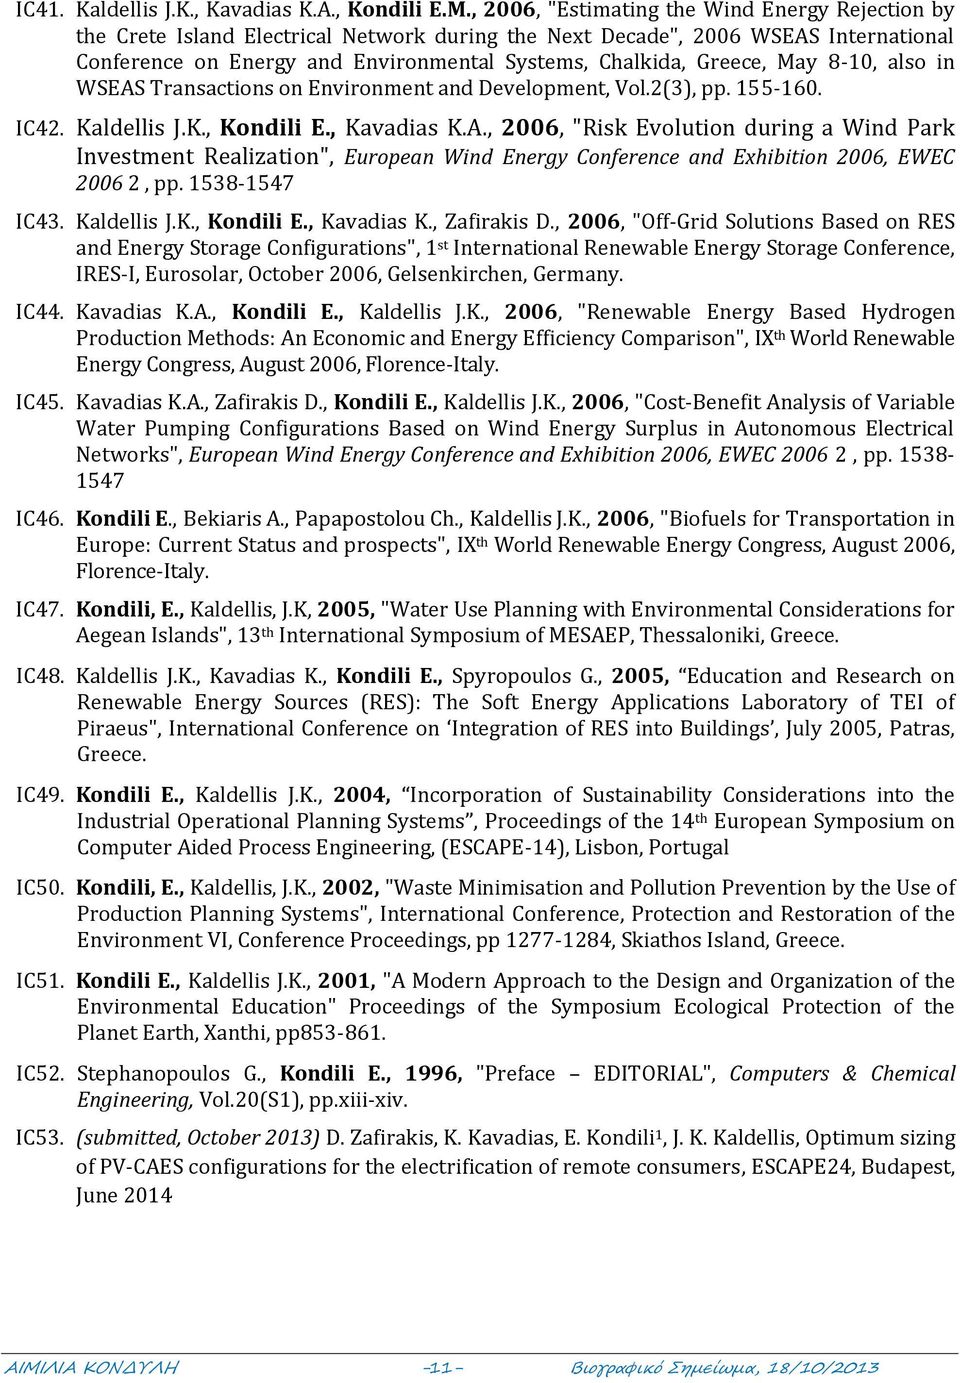 Greece, May 8-10, also in WSEAS Transactions on Environment and Development, Vol.2(3), pp. 155-160. IC42. Kaldellis J.K., Kondili E., Kavadias K.A., 2006, "Risk Evolution during a Wind Park Investment Realization", European Wind Energy Conference and Exhibition 2006, EWEC 2006 2, pp.